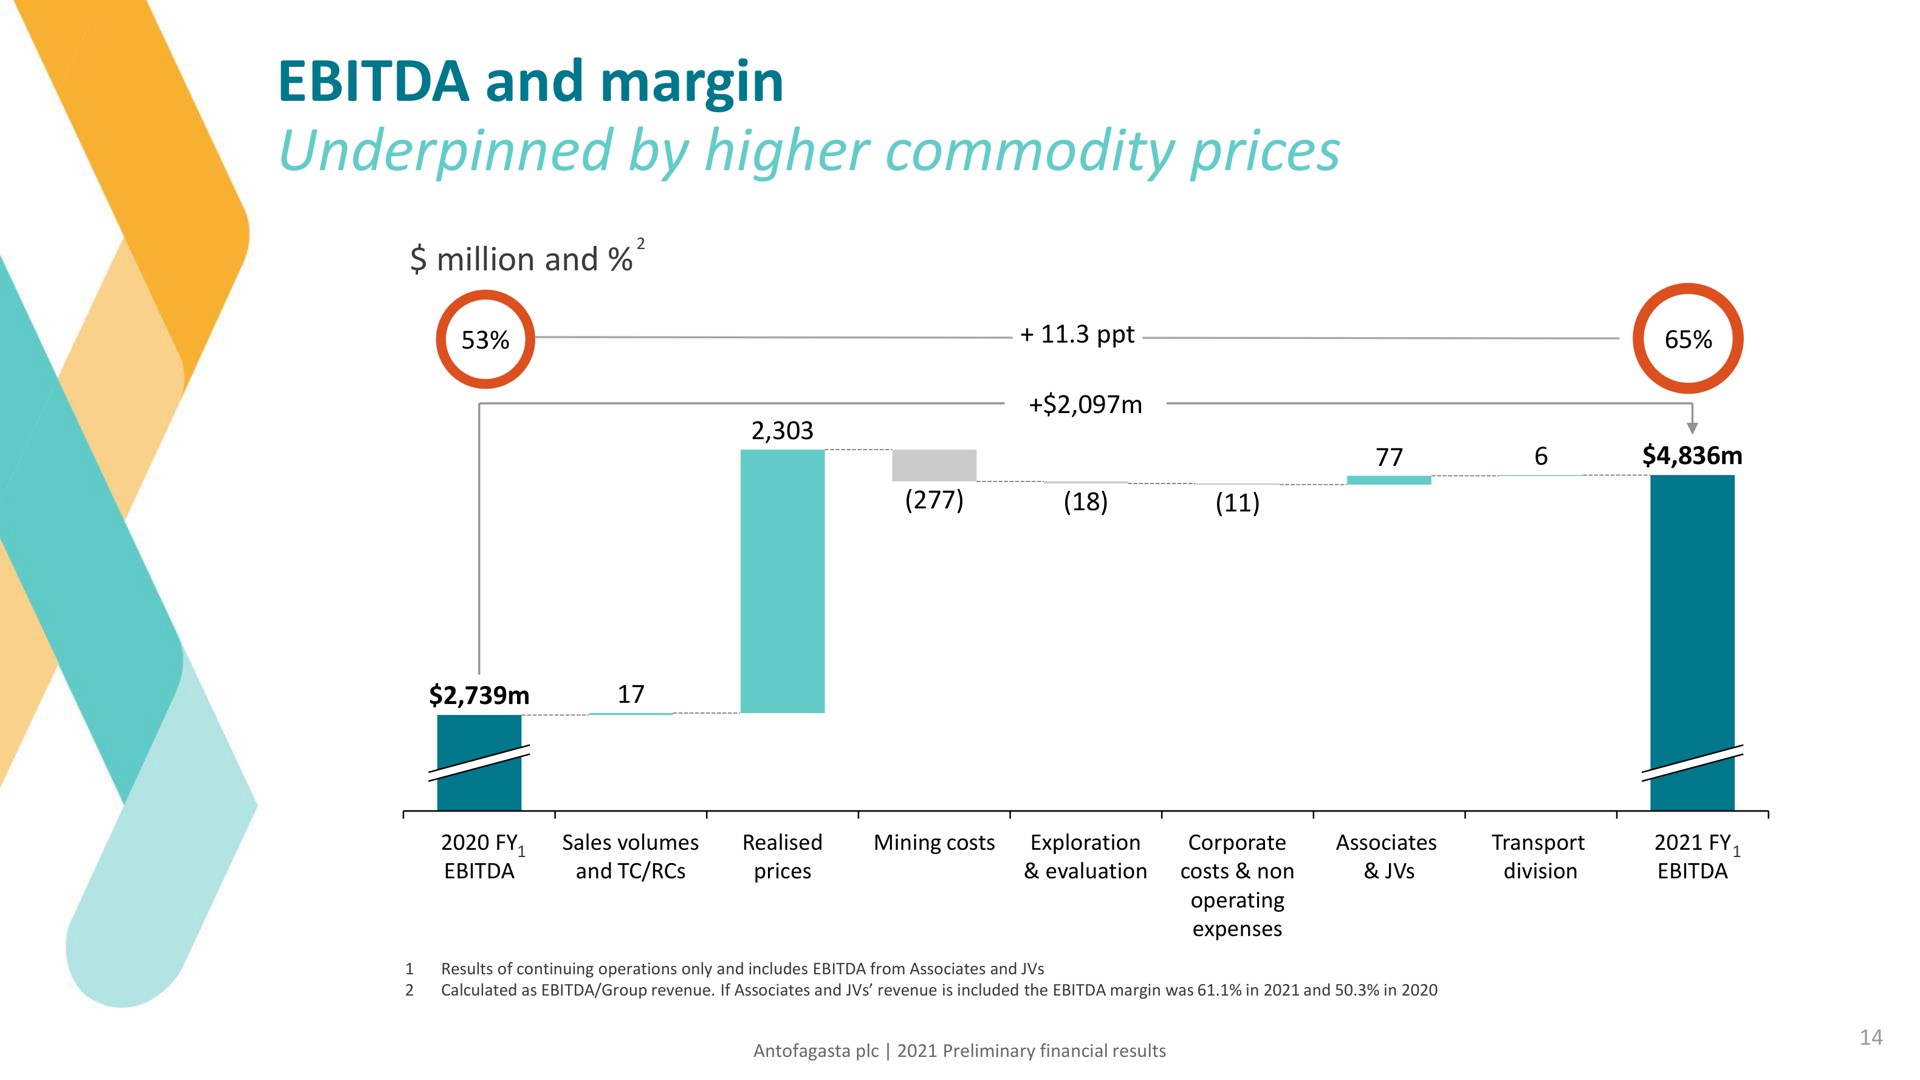 and margin underpinned by higher commodity prices | Antofagasta